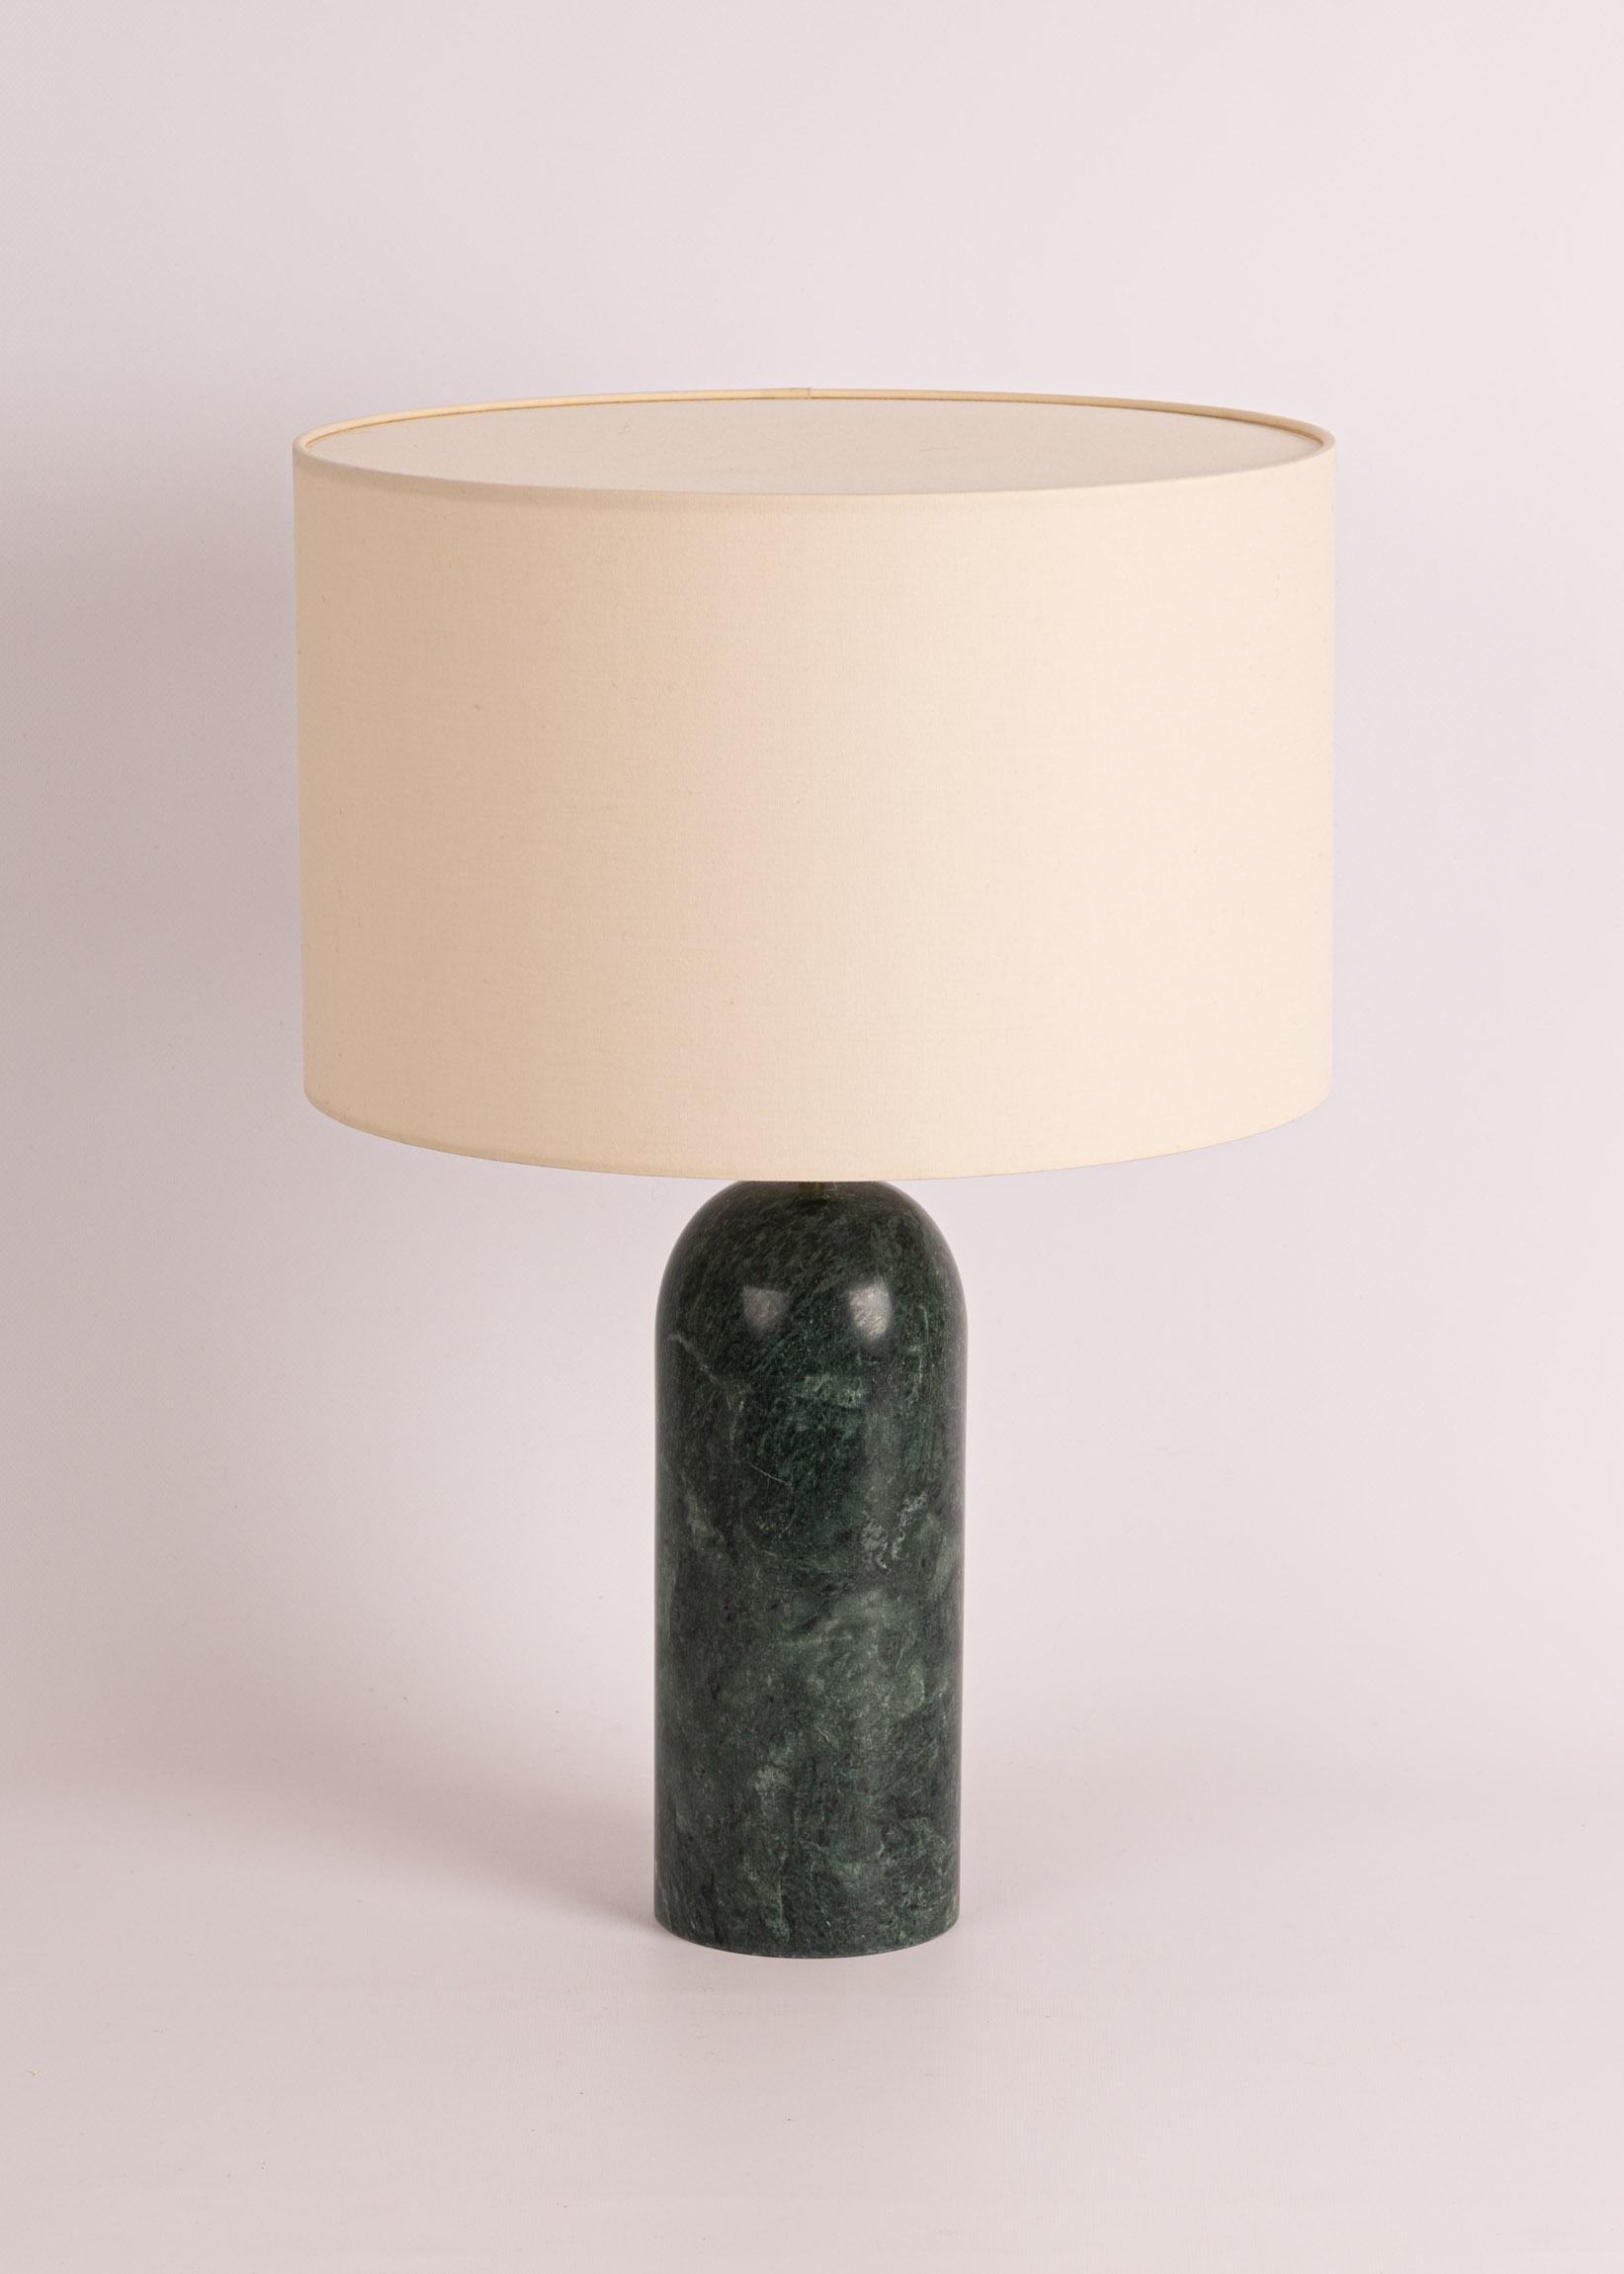 Green Marble Pura Table Lamp by Simone & Marcel
Dimensions: Ø 40 x H 58 cm.
Materials: Brass, cotton and green marble.

Also available in different marble, wood and alabaster options and finishes. Custom options available on request. Please contact